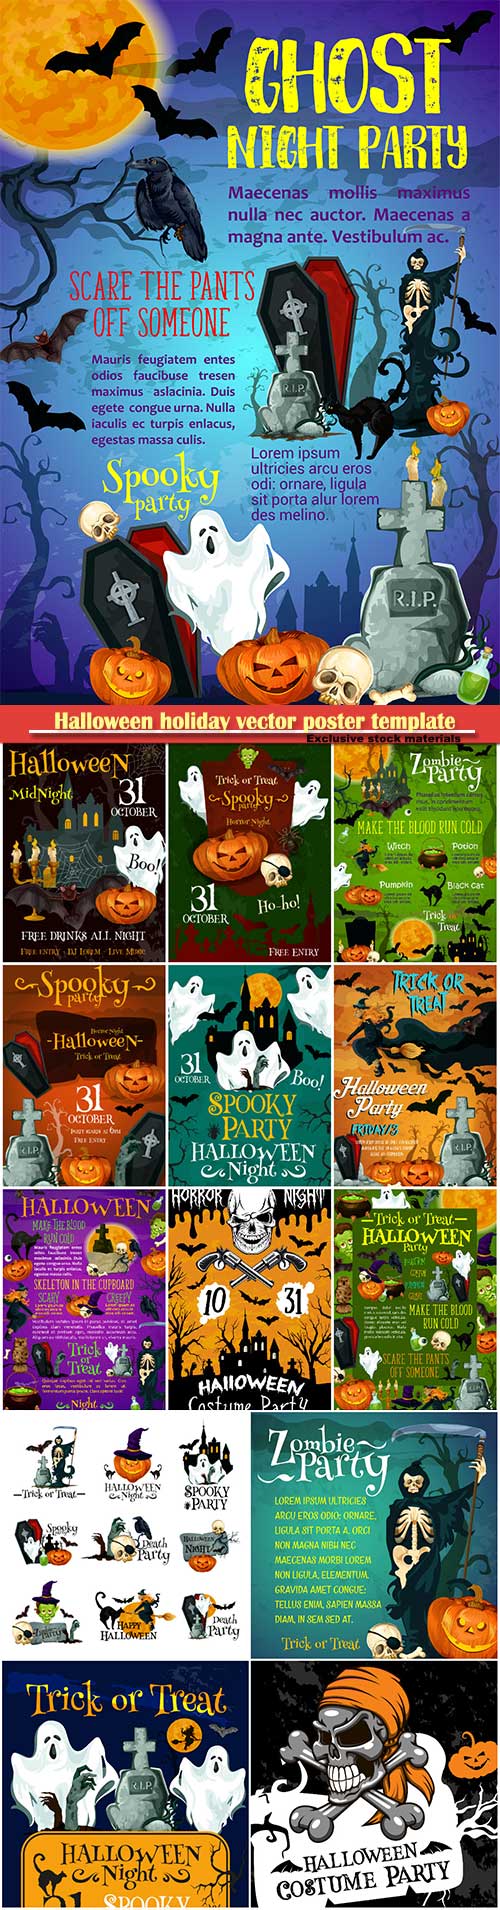 Halloween holiday vector poster template, pumpkin with witch hat, spider an ...